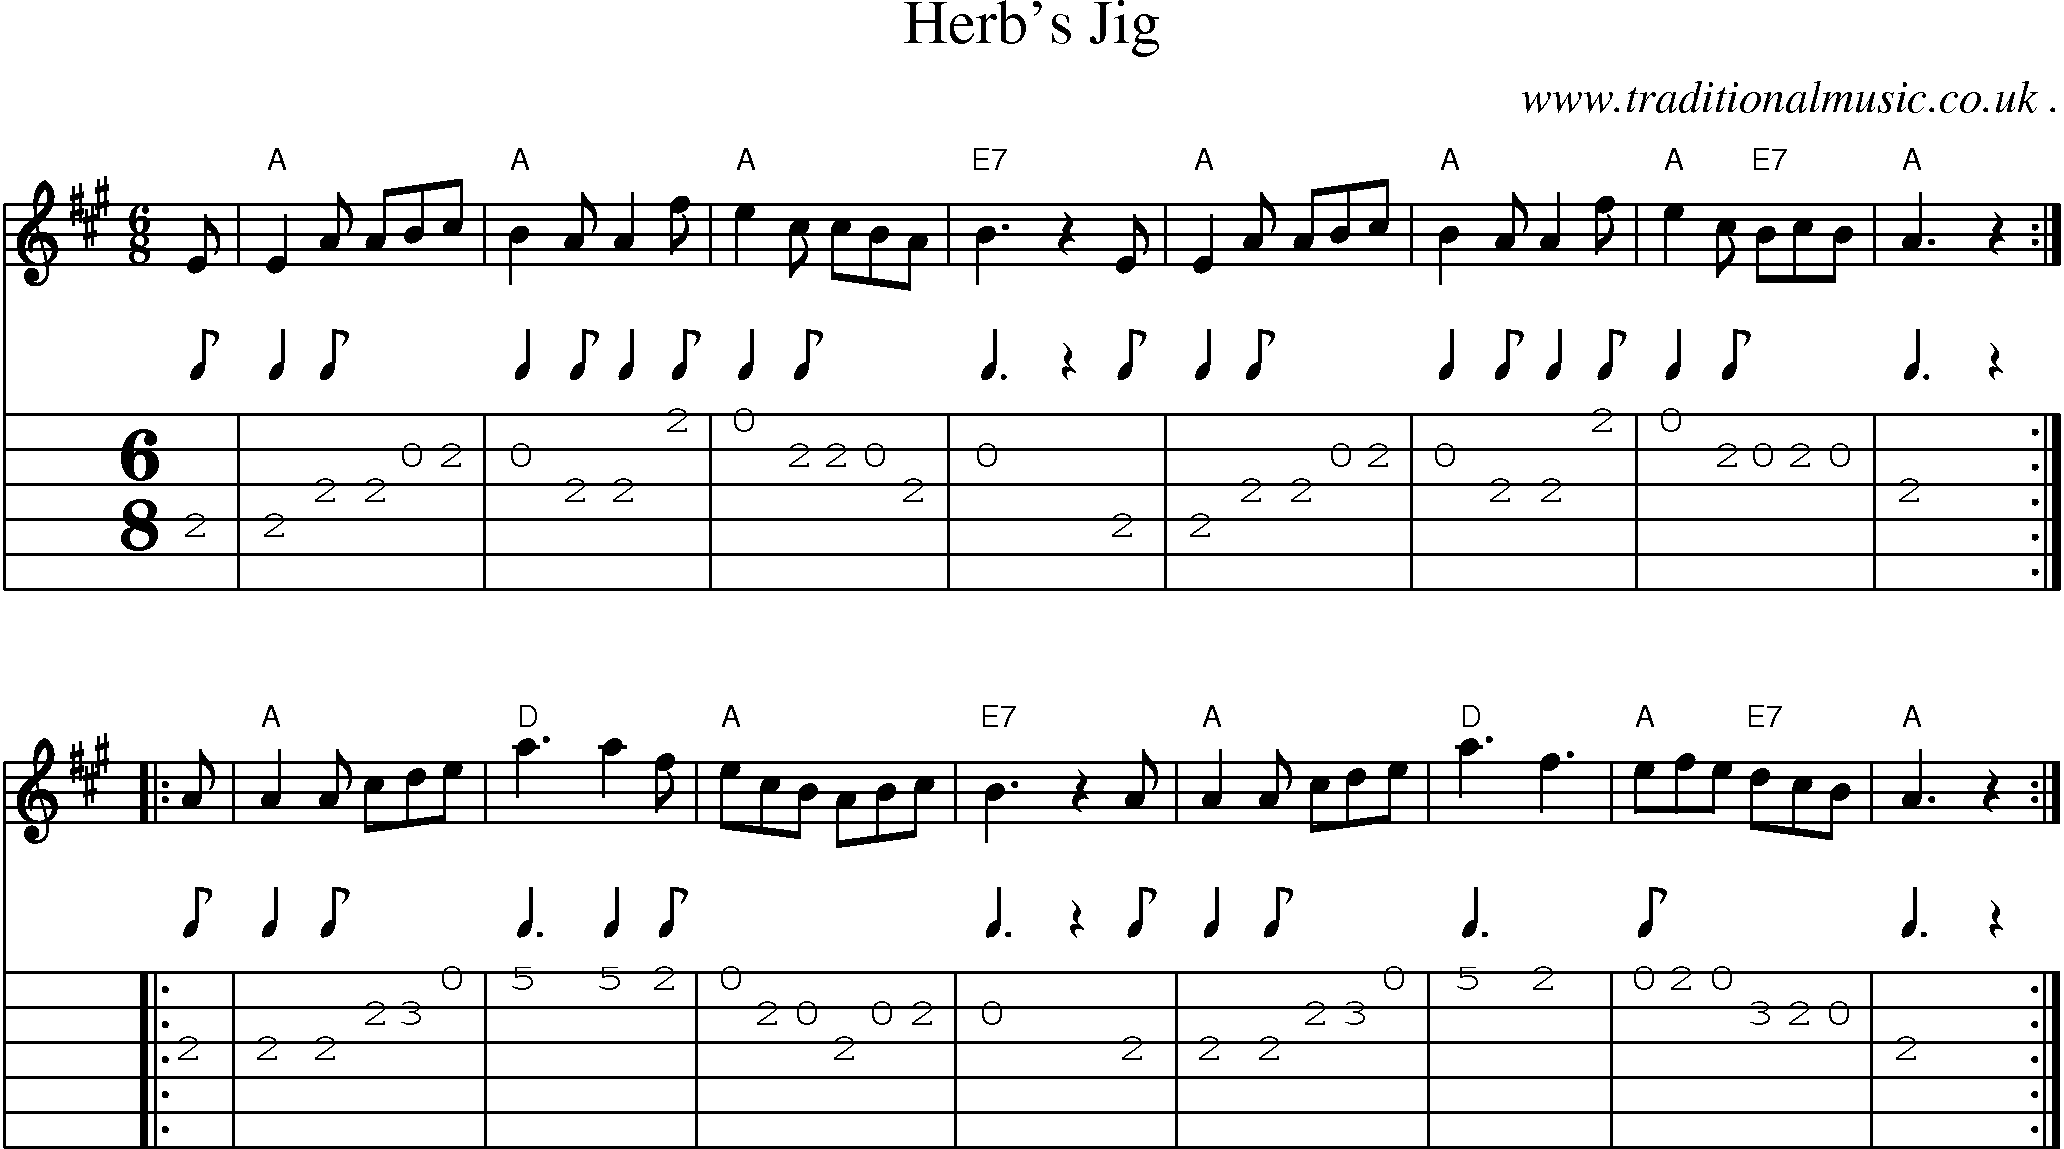 Sheet-music  score, Chords and Guitar Tabs for Herbs Jig